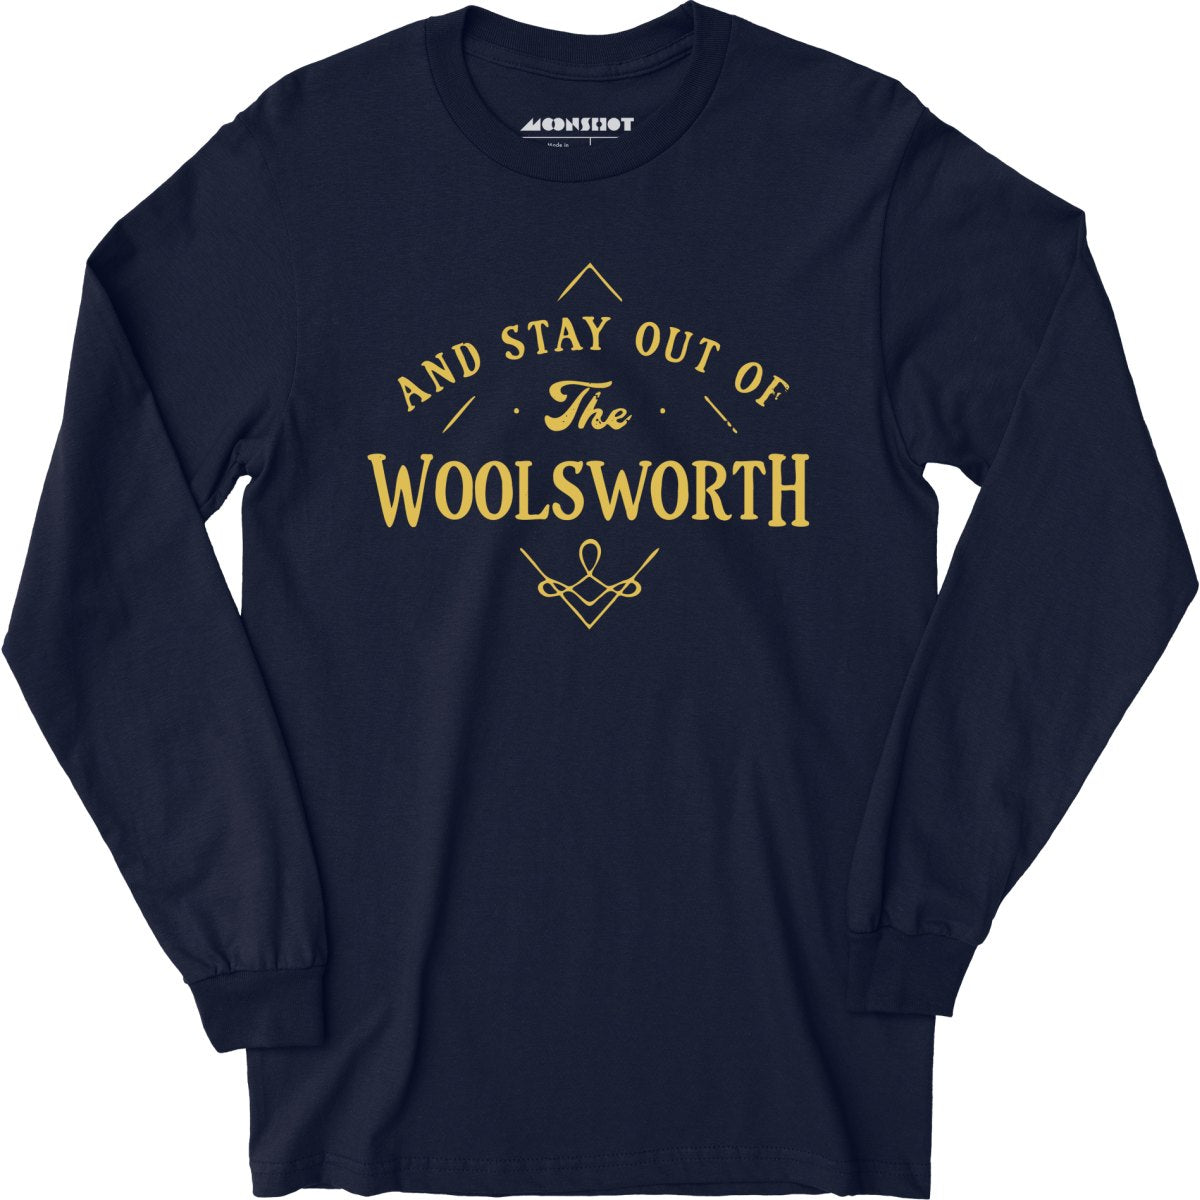 And Stay Out of The Woolsworth - Long Sleeve T-Shirt